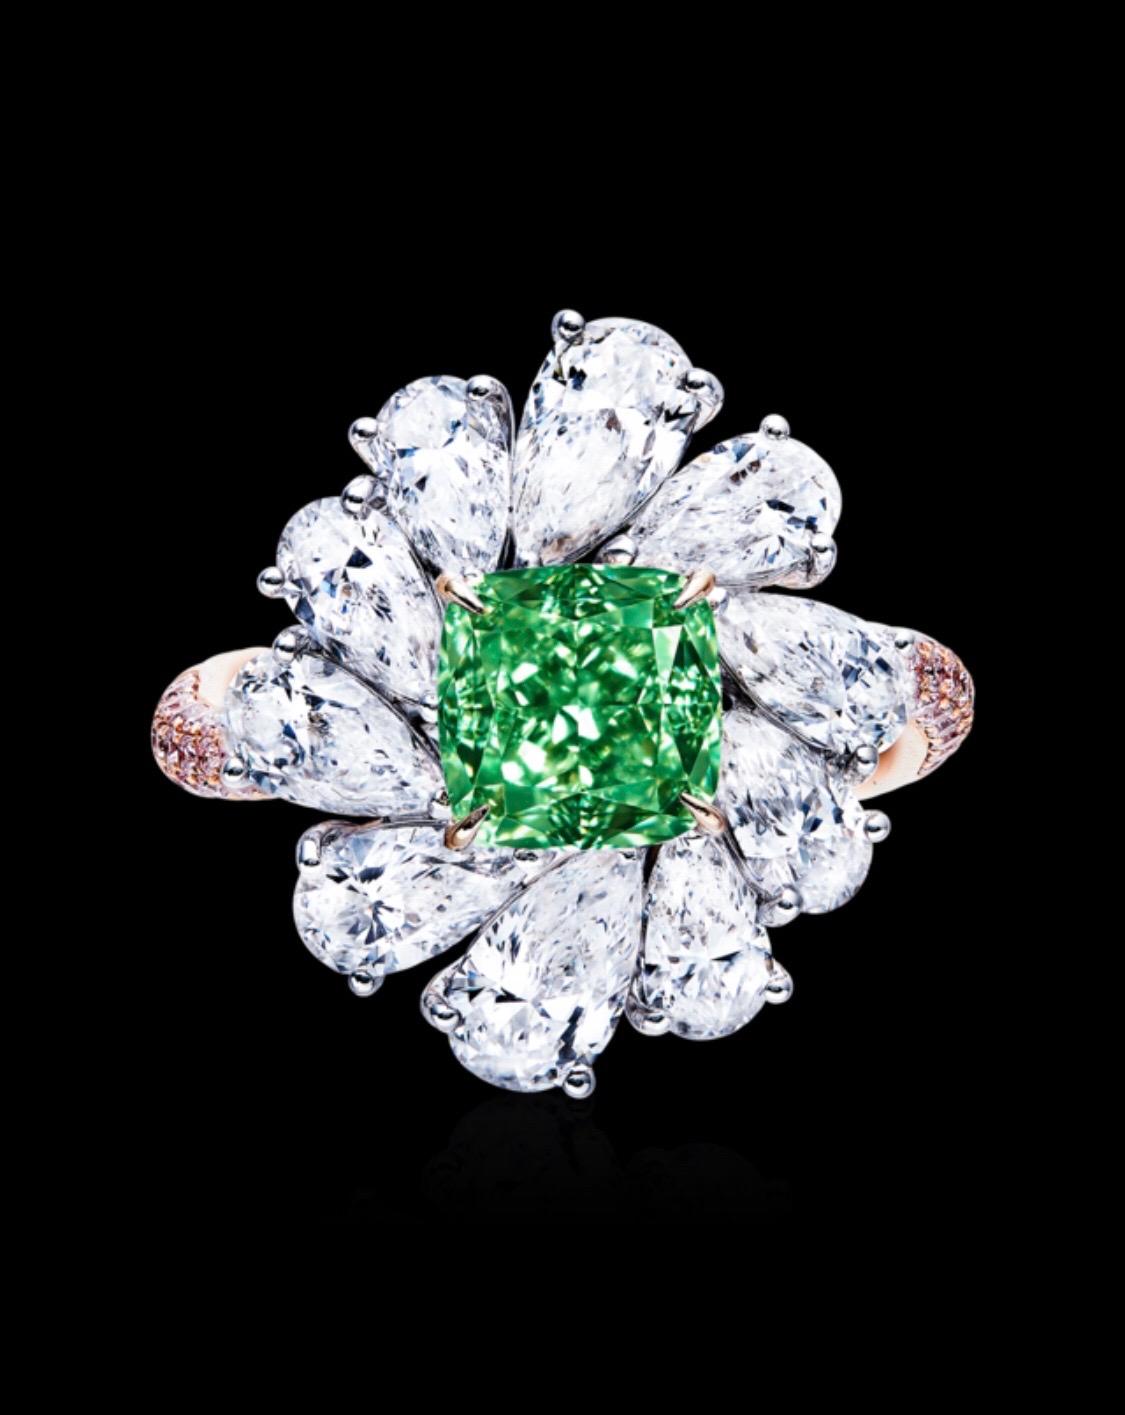 Showcasing a very special certified 2.30ct natural fancy intense green diamond ring certified by GIA. We are proud to showcase one of the very few if any at all..natural intense green diamonds of this size on the market. Hand made in the Emilio